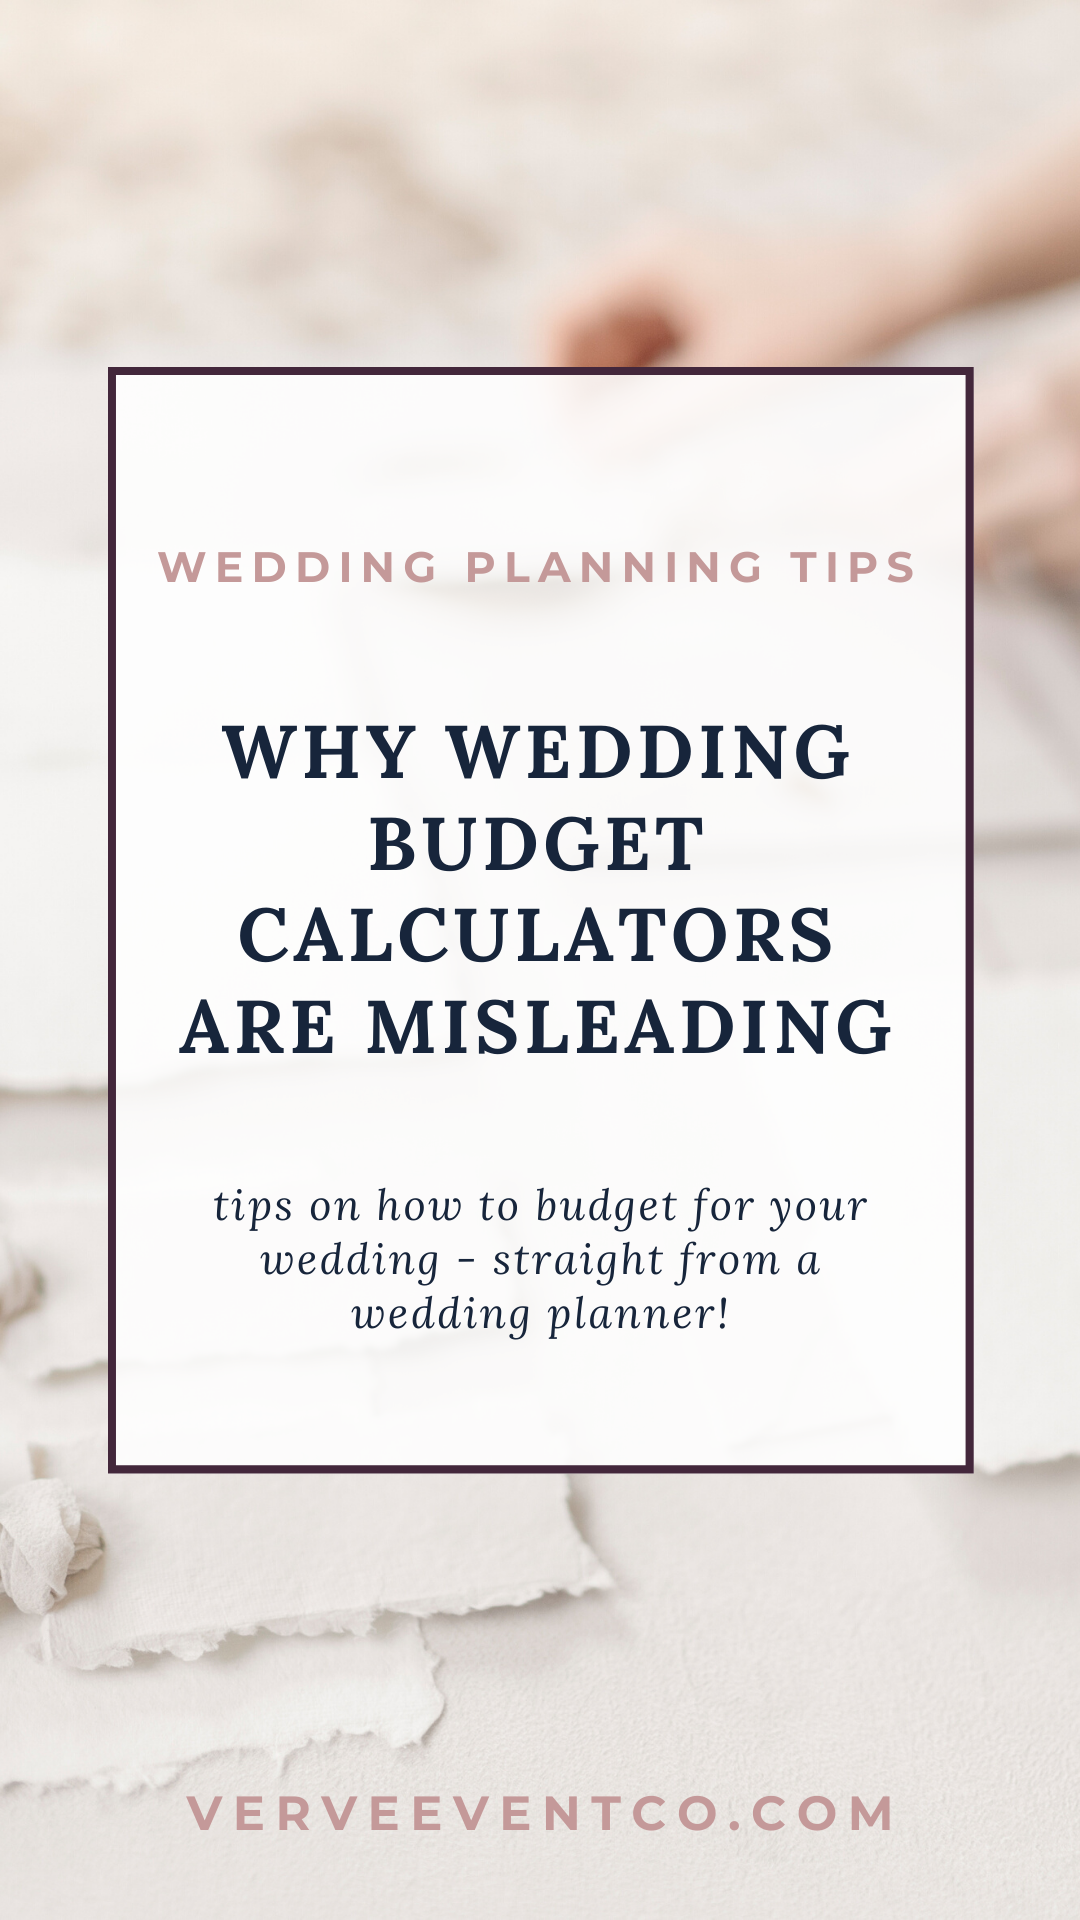 Why Wedding Budget Calculators Are Misleading